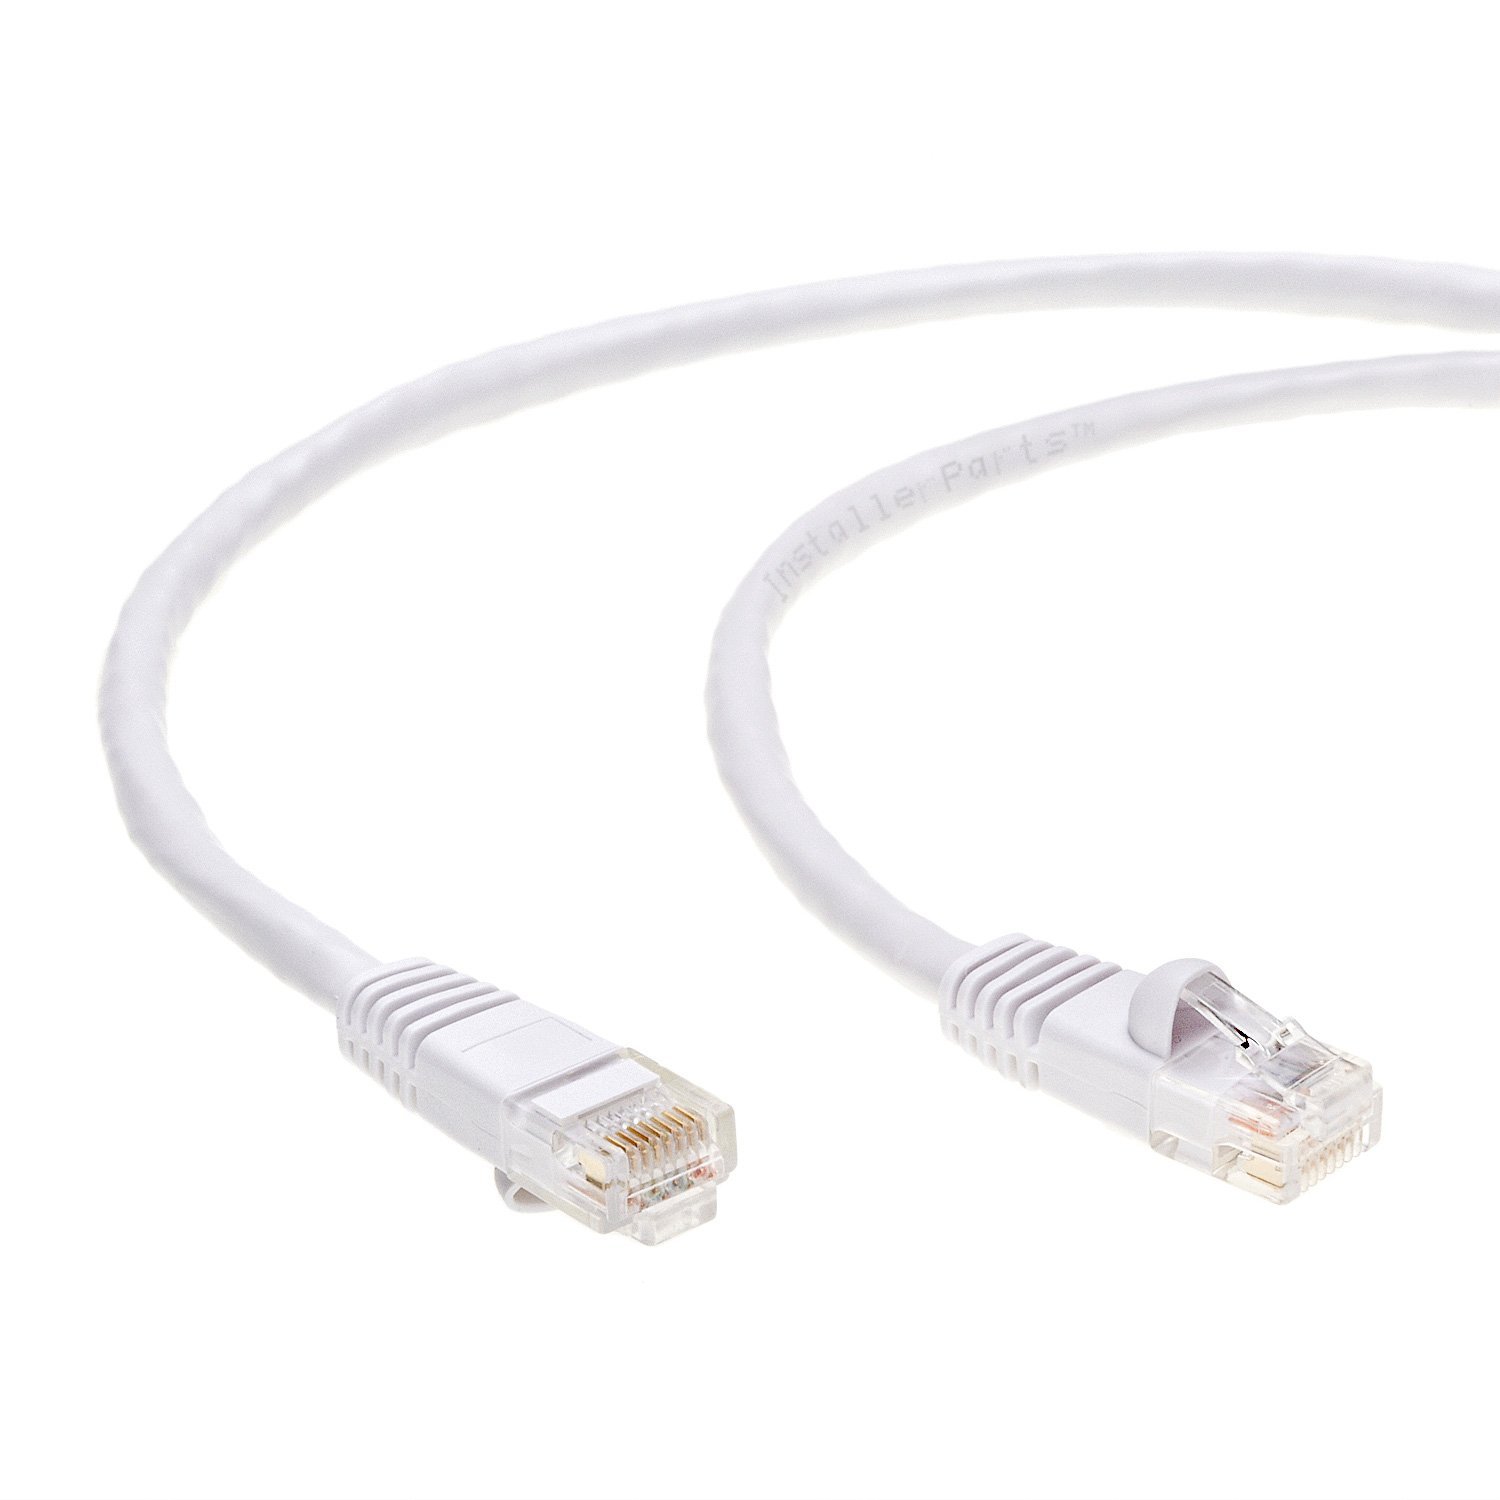 InstallerParts (5 Pack) Ethernet Cable CAT6 Cable UTP Booted 100 FT - White - Professional Series - 10Gigabit/Sec Network / High Speed Internet Cable, 550MHZ - image 3 of 5